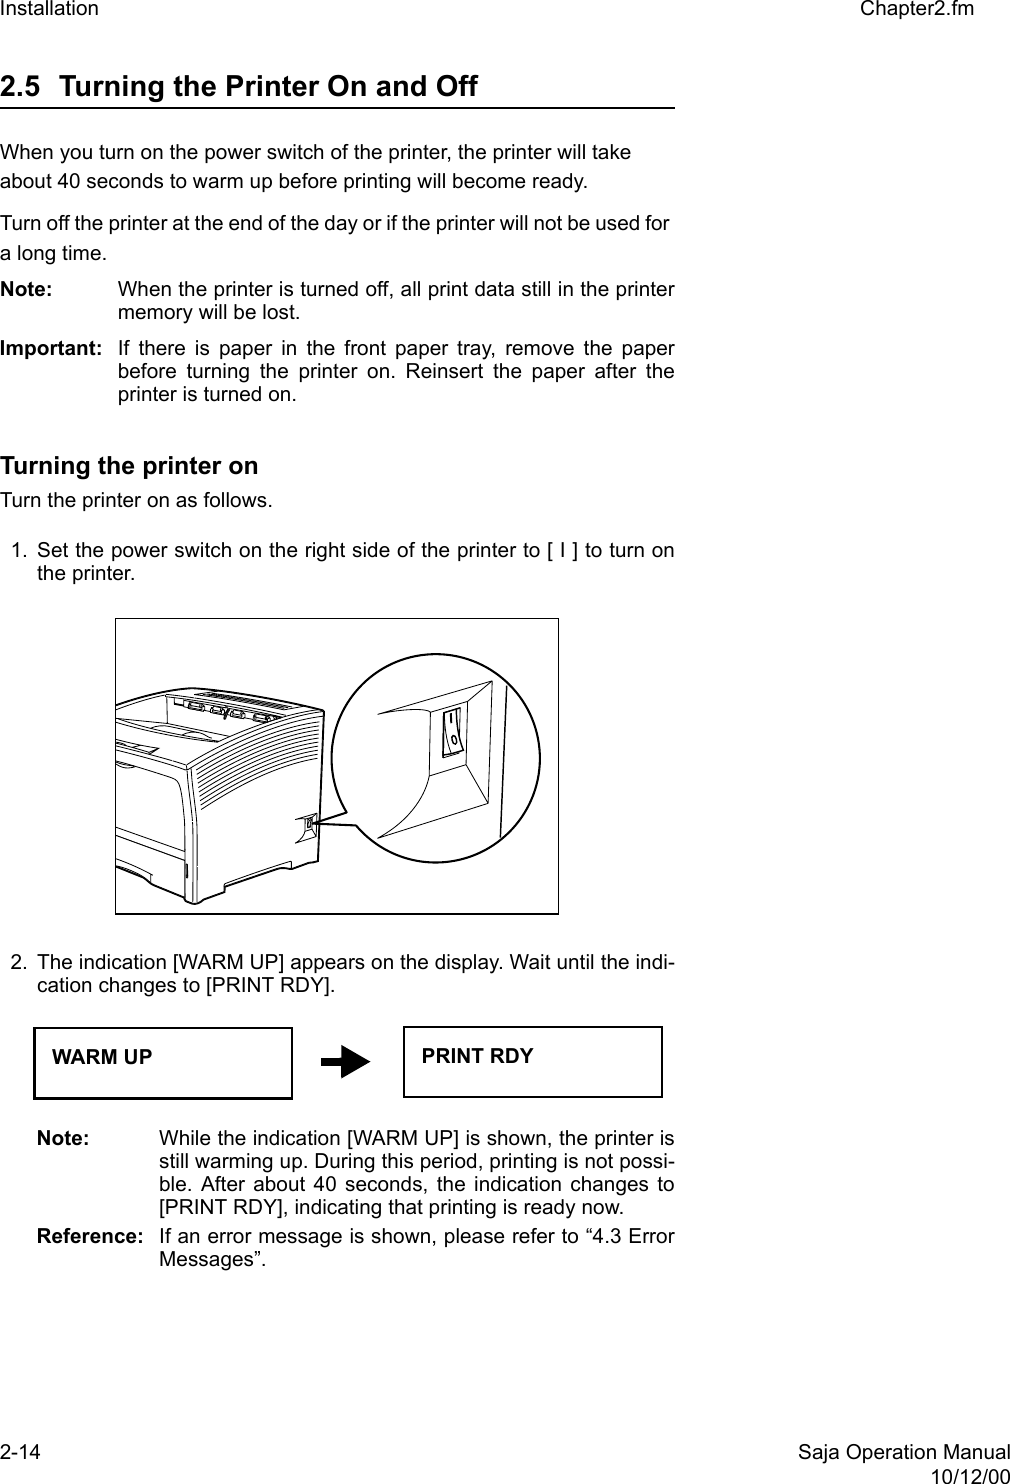 2-14 Saja Operation Manual10/12/00Installation Chapter2.fm2.5 Turning the Printer On and Off When you turn on the power switch of the printer, the printer will take about 40 seconds to warm up before printing will become ready. Turn off the printer at the end of the day or if the printer will not be used for a long time.Note:  When the printer is turned off, all print data still in the printermemory will be lost. Important:  If there is paper in the front paper tray, remove the paperbefore turning the printer on. Reinsert the paper after theprinter is turned on. Turning the printer on Turn the printer on as follows. 1. Set the power switch on the right side of the printer to [ I ] to turn onthe printer. 2. The indication [WARM UP] appears on the display. Wait until the indi-cation changes to [PRINT RDY]. Note:  While the indication [WARM UP] is shown, the printer isstill warming up. During this period, printing is not possi-ble. After about 40 seconds, the indication changes to[PRINT RDY], indicating that printing is ready now. Reference: If an error message is shown, please refer to “4.3 ErrorMessages”. WARM UP PRINT RDY